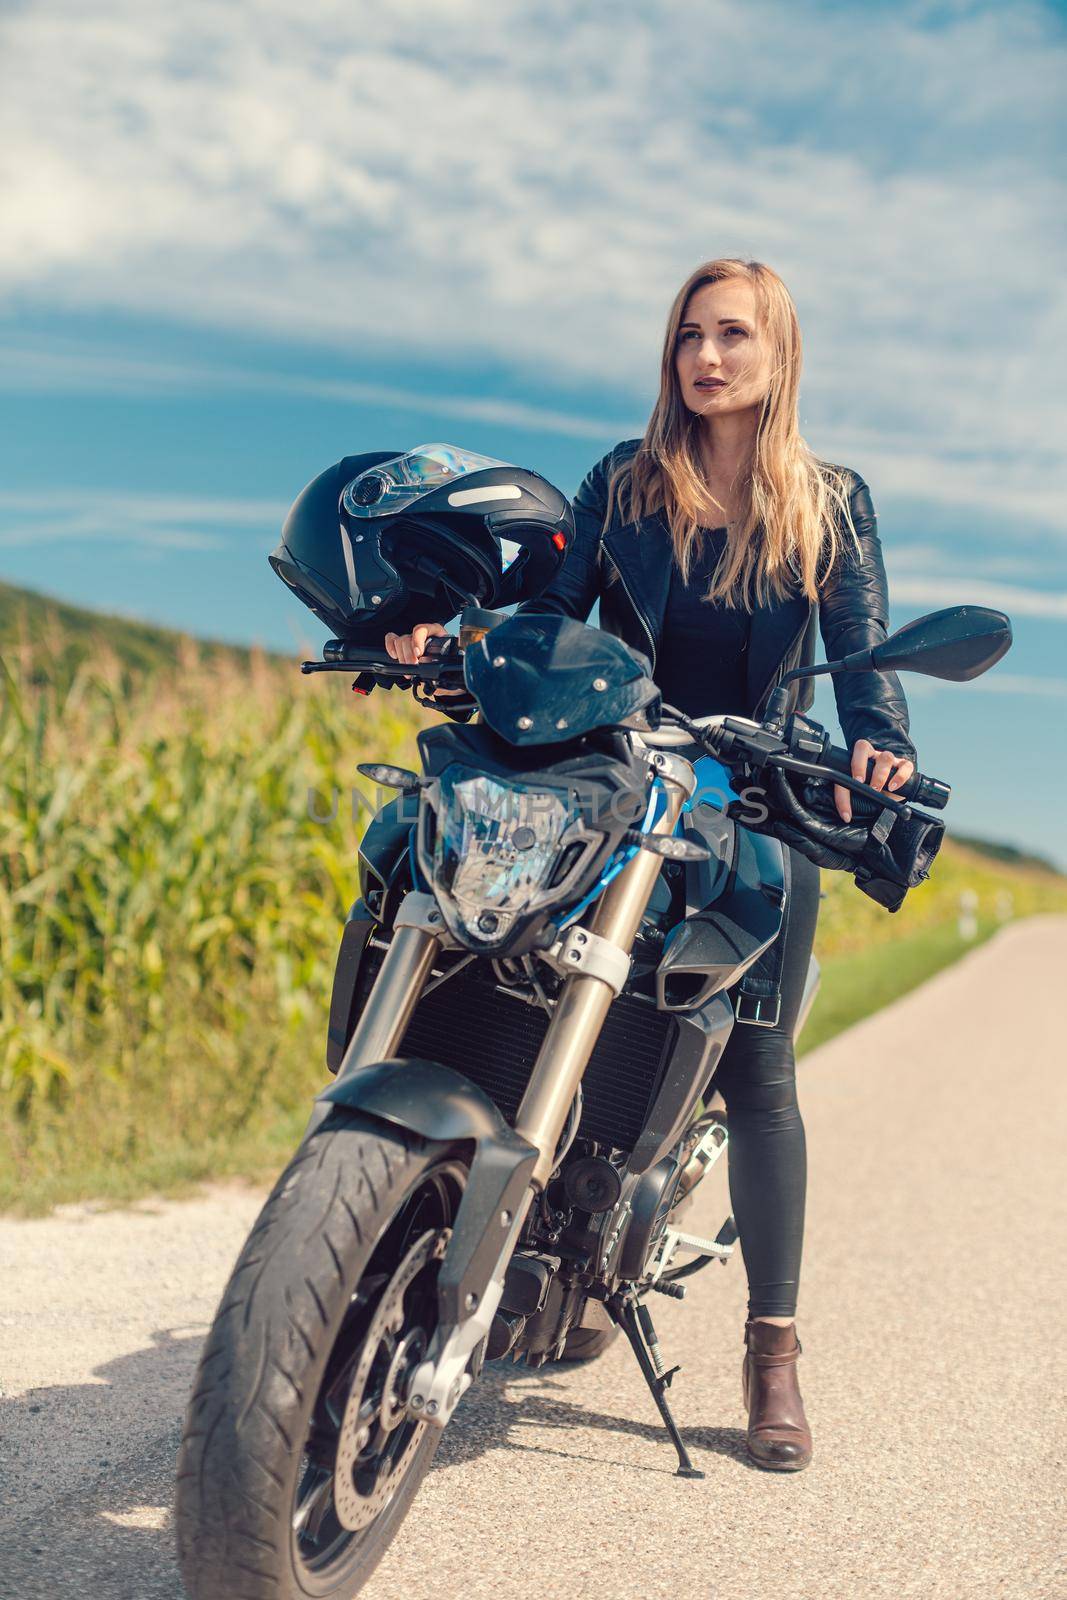 Beautiful woman on a motorcycle looking at the road ahead by Kzenon